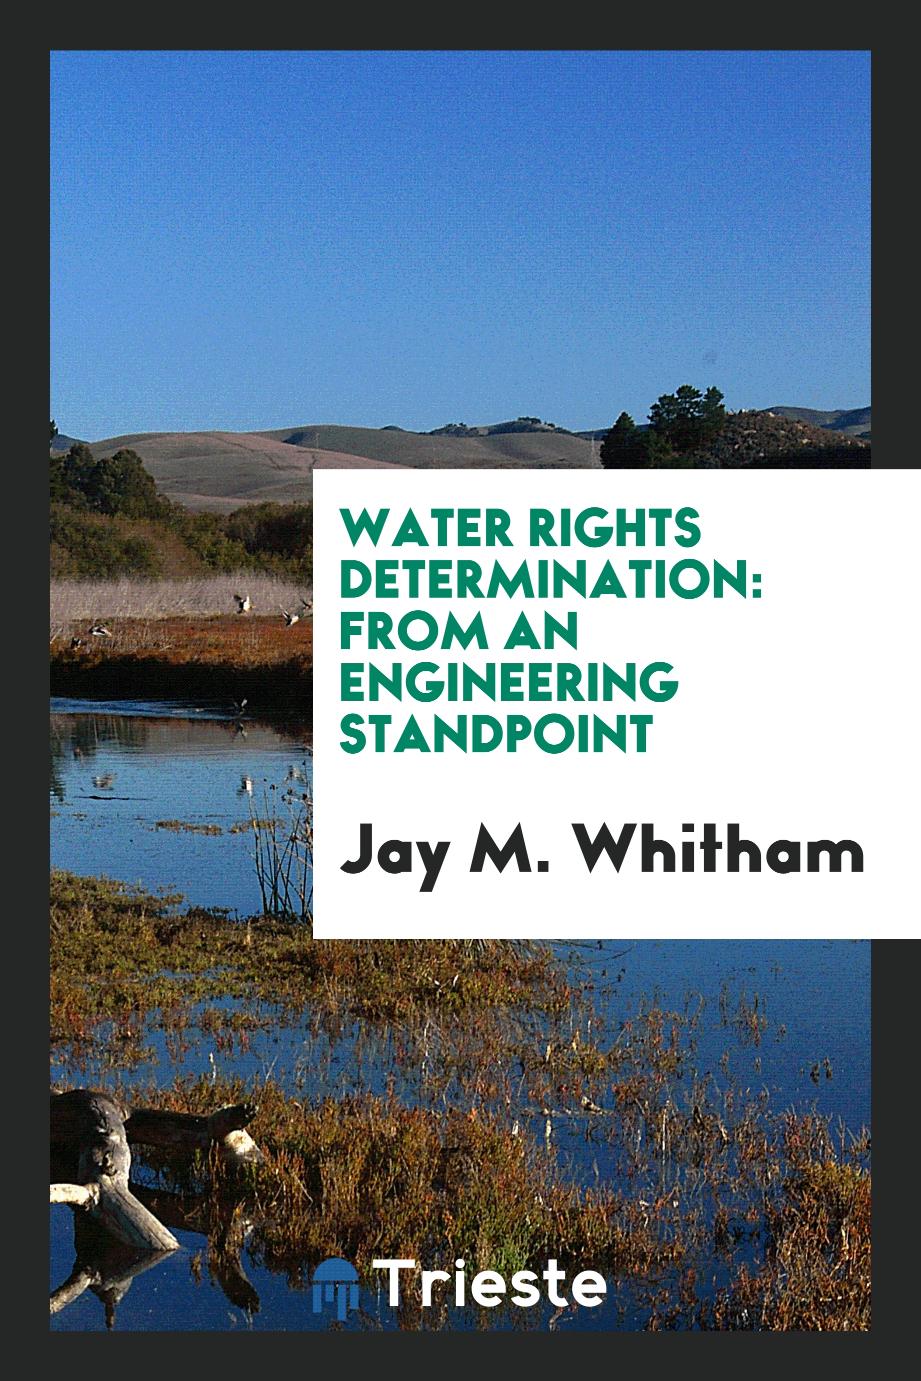 Water rights determination: from an engineering standpoint